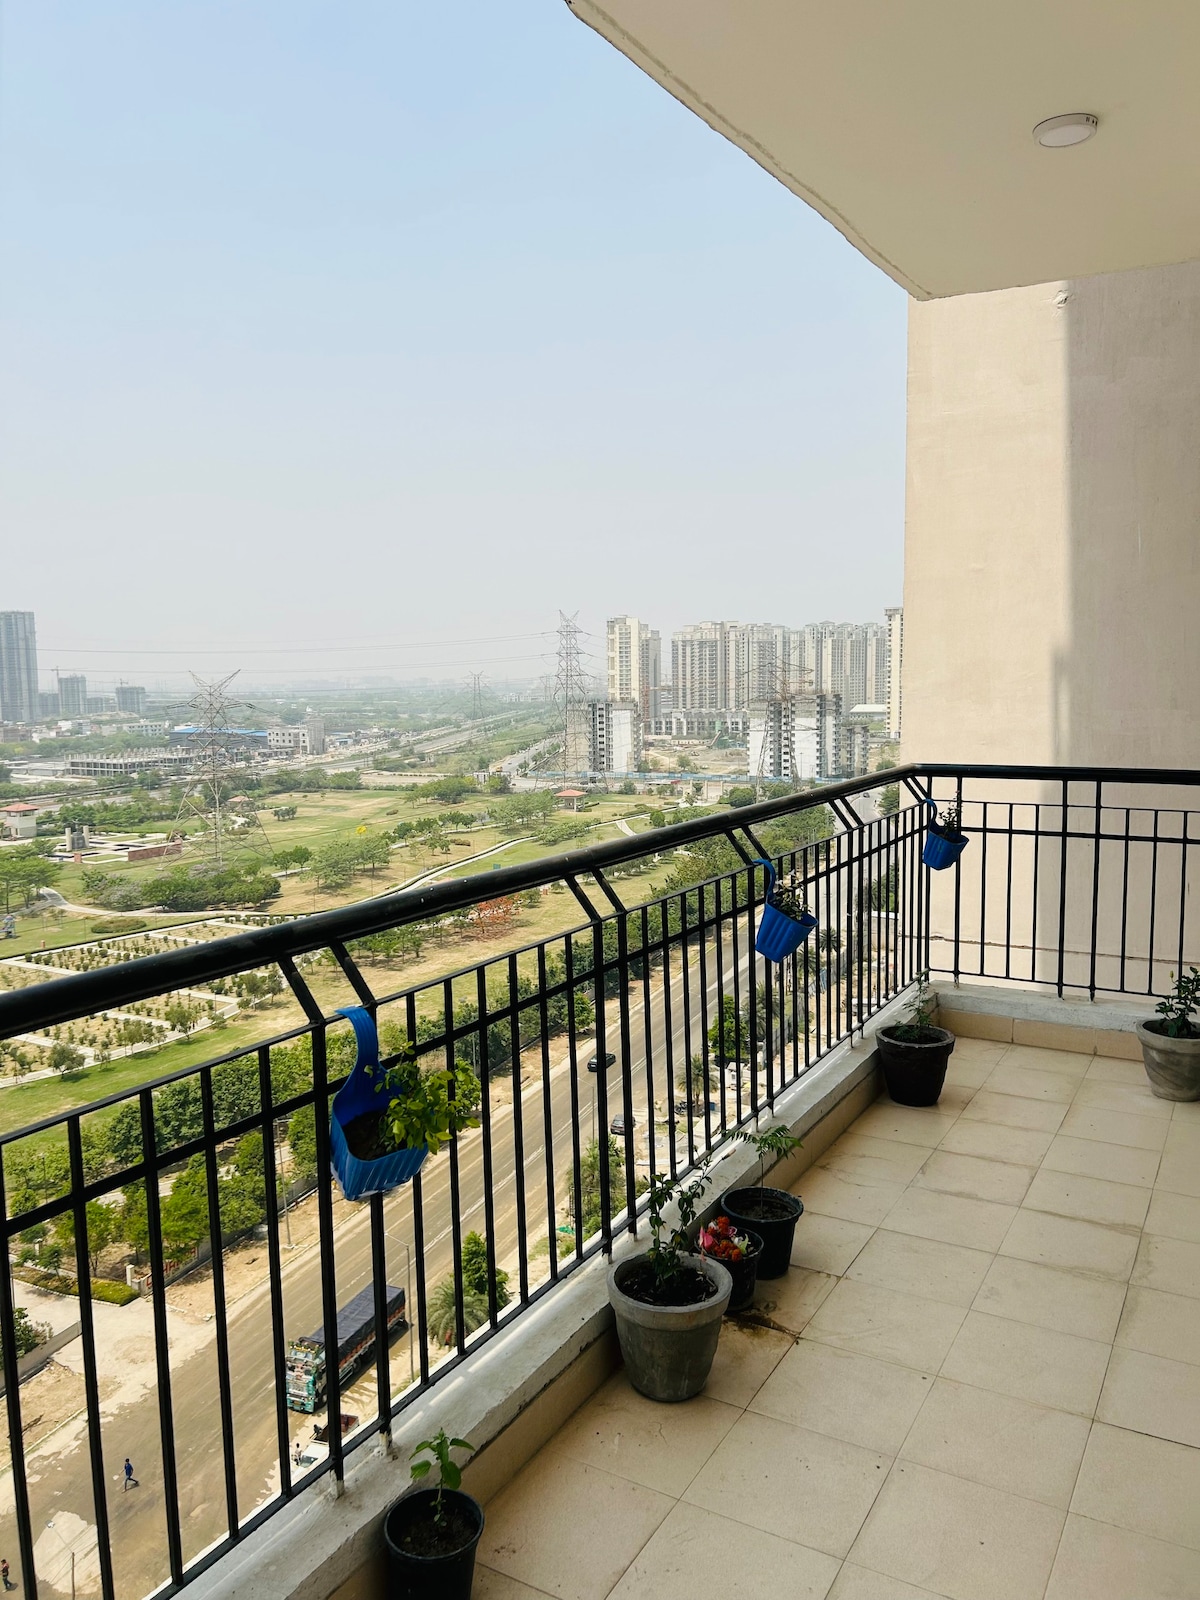 Pvt room in a shared 2BHK apt in Sec 150 Noida